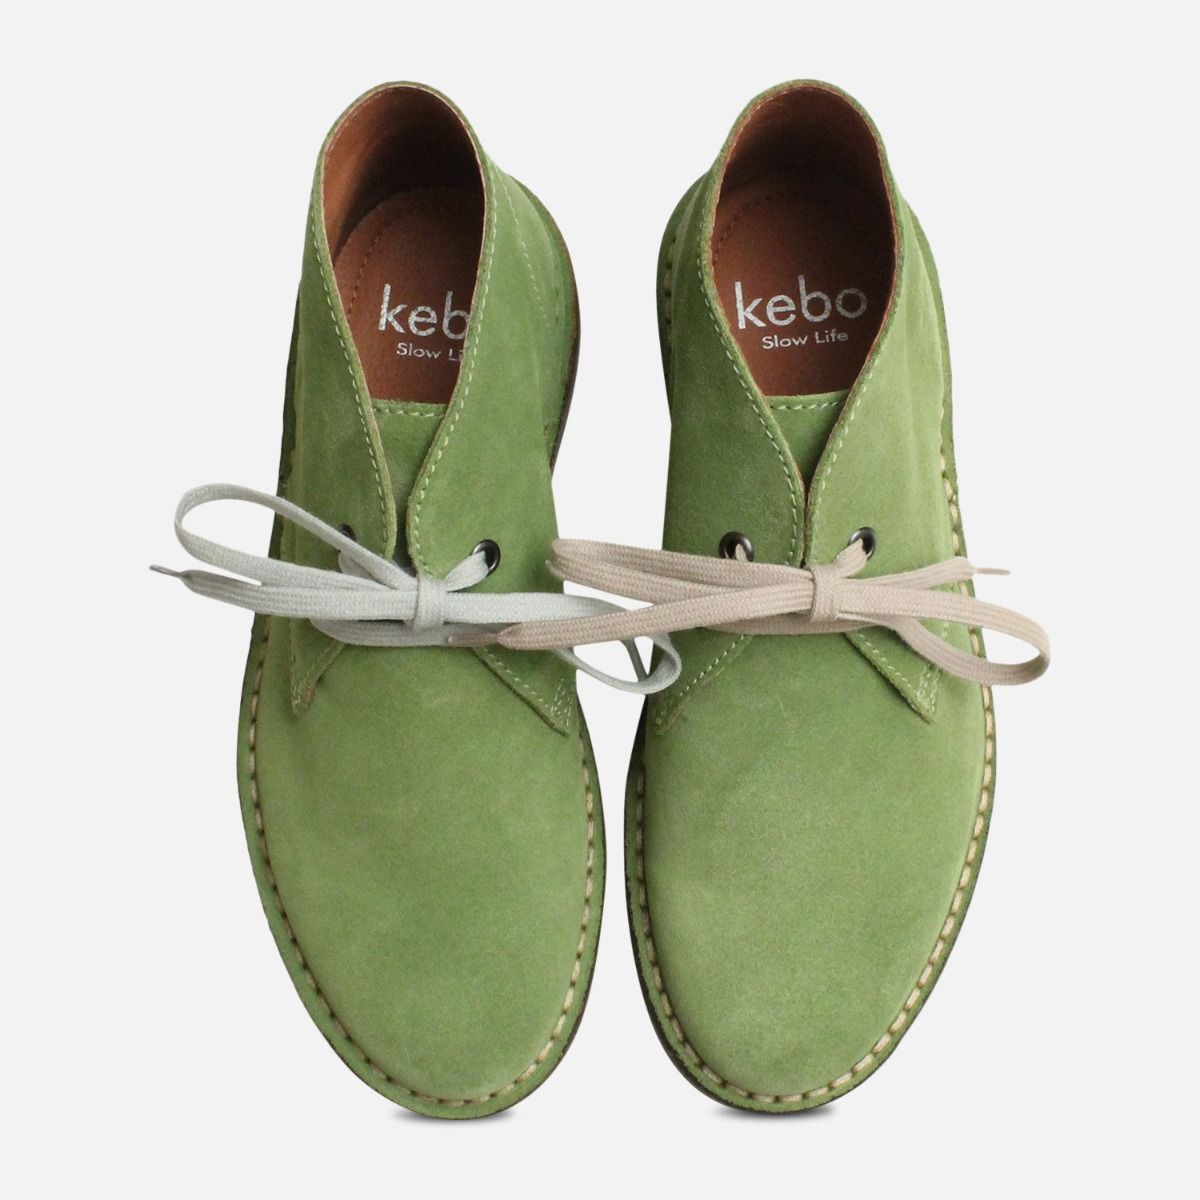 green suede shoes ladies